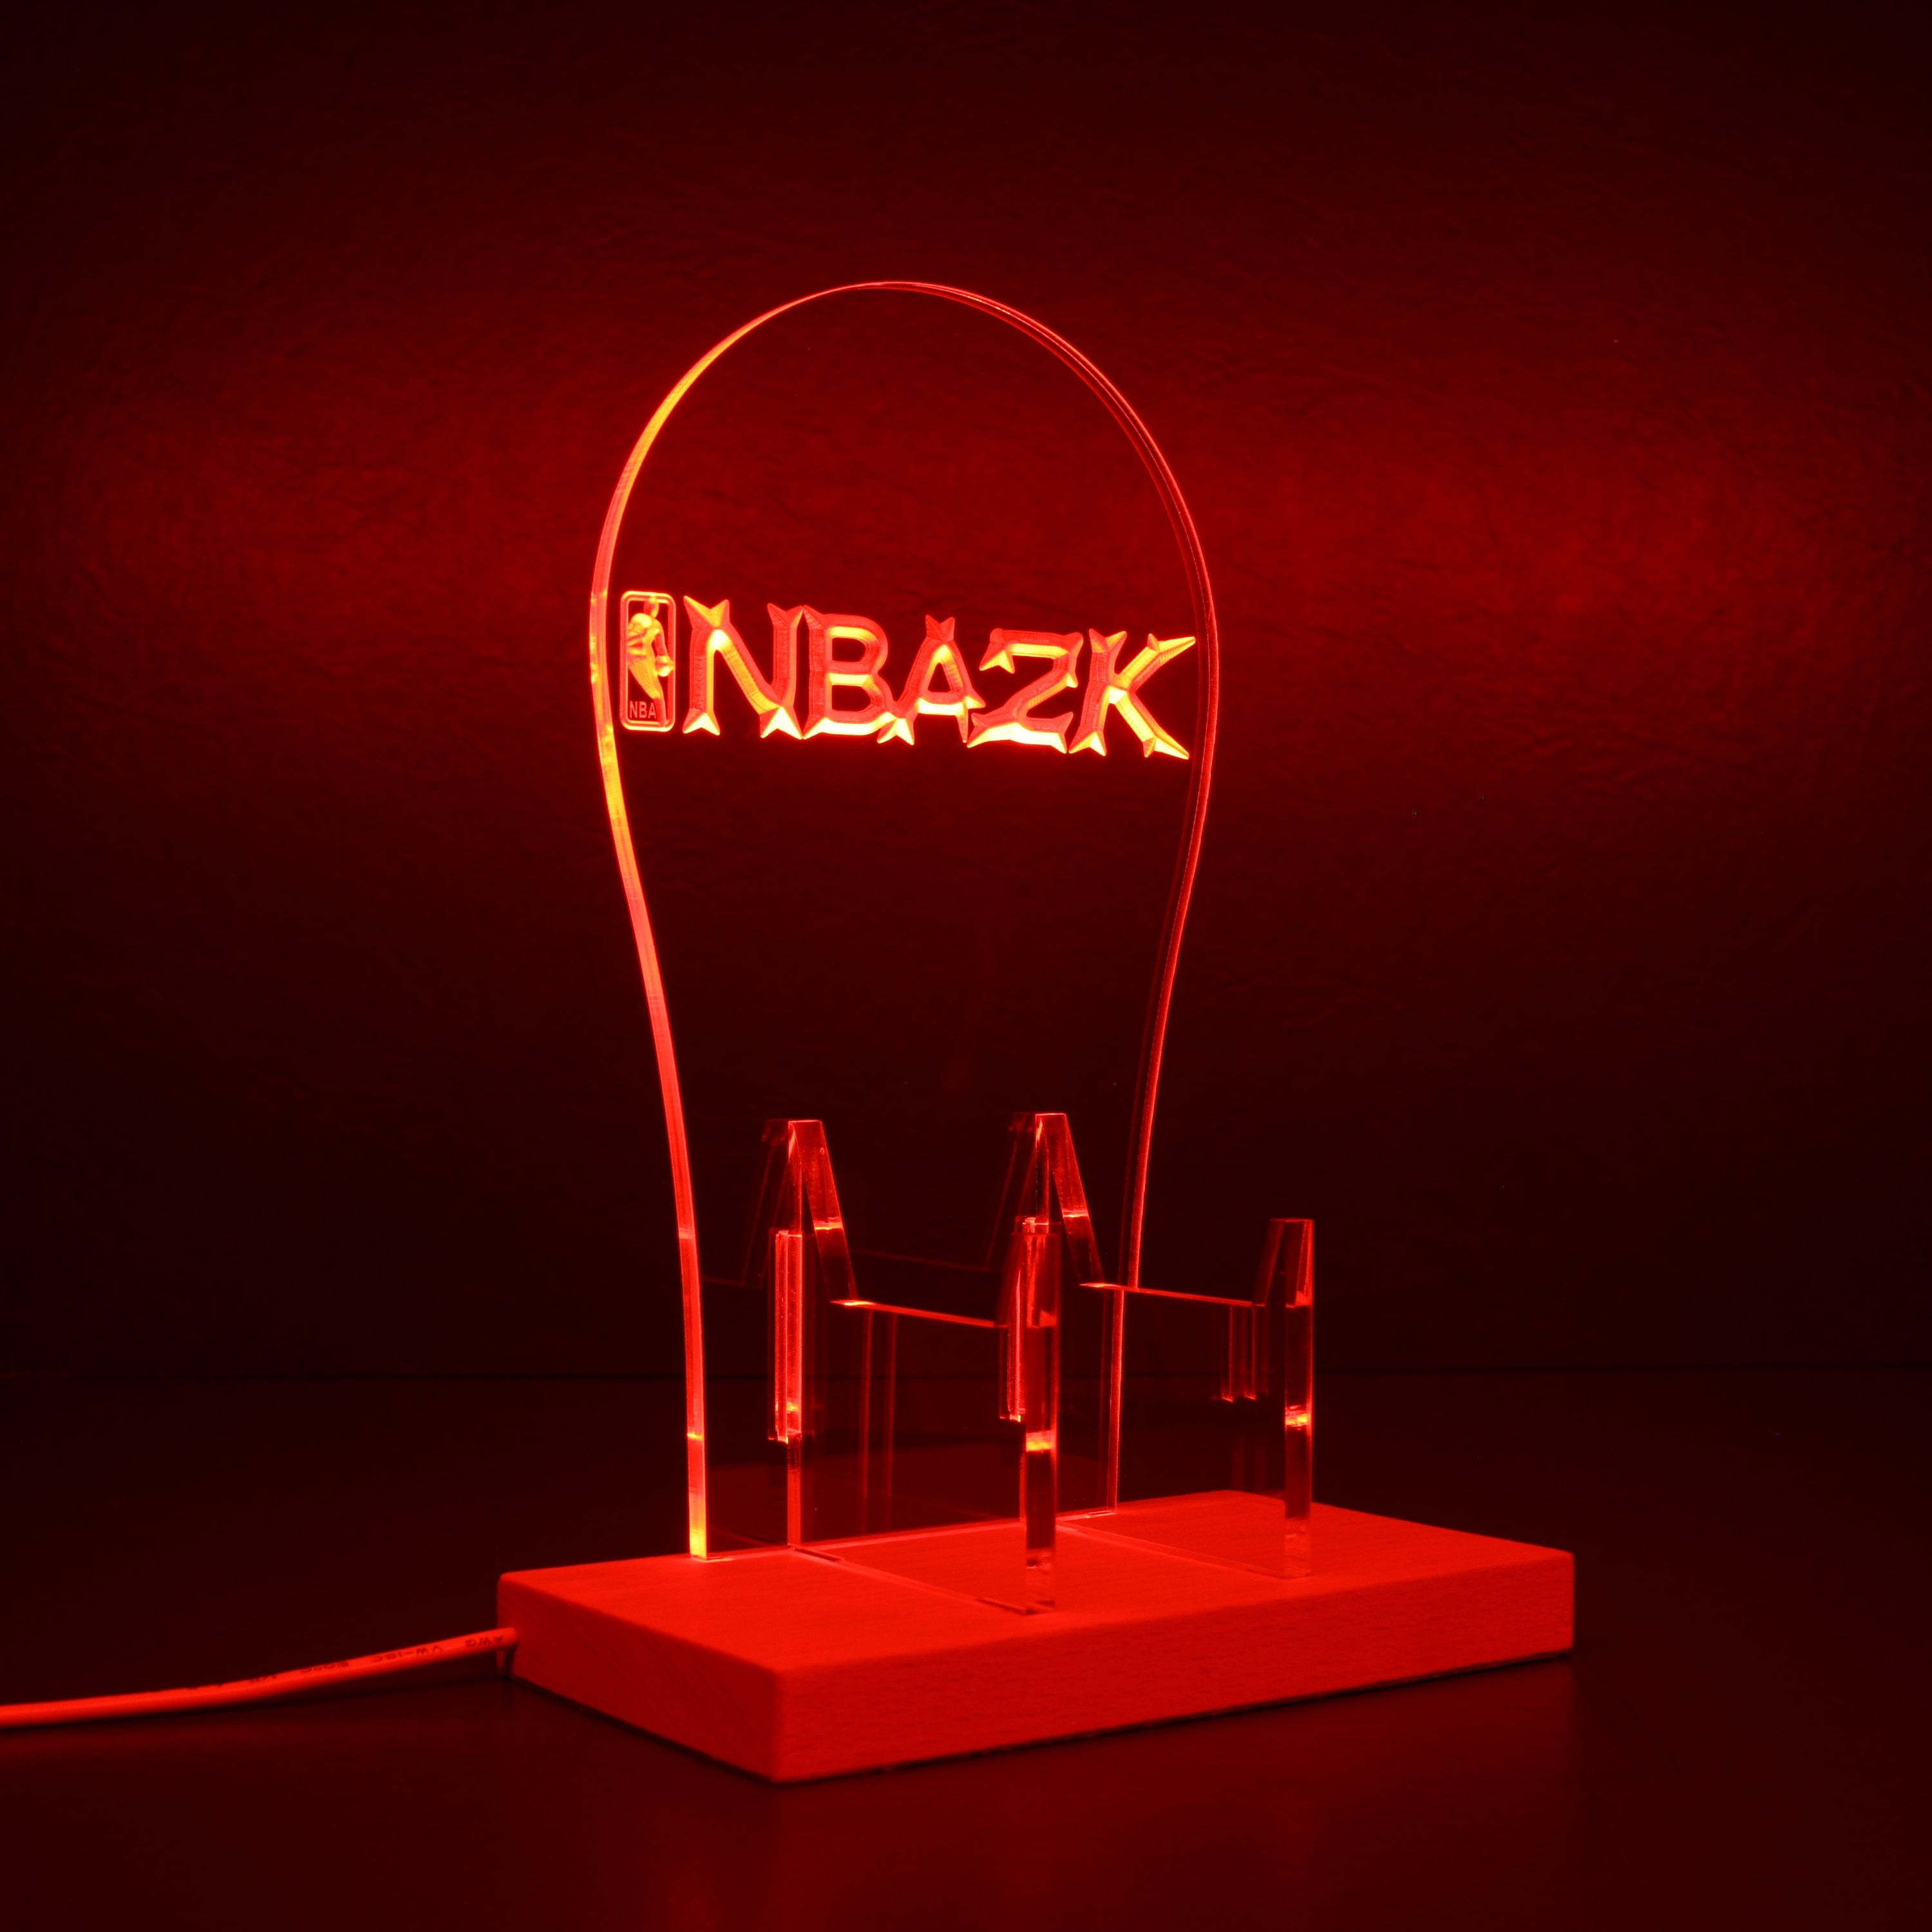 NBA2K RGB LED Gaming Headset Controller Stand